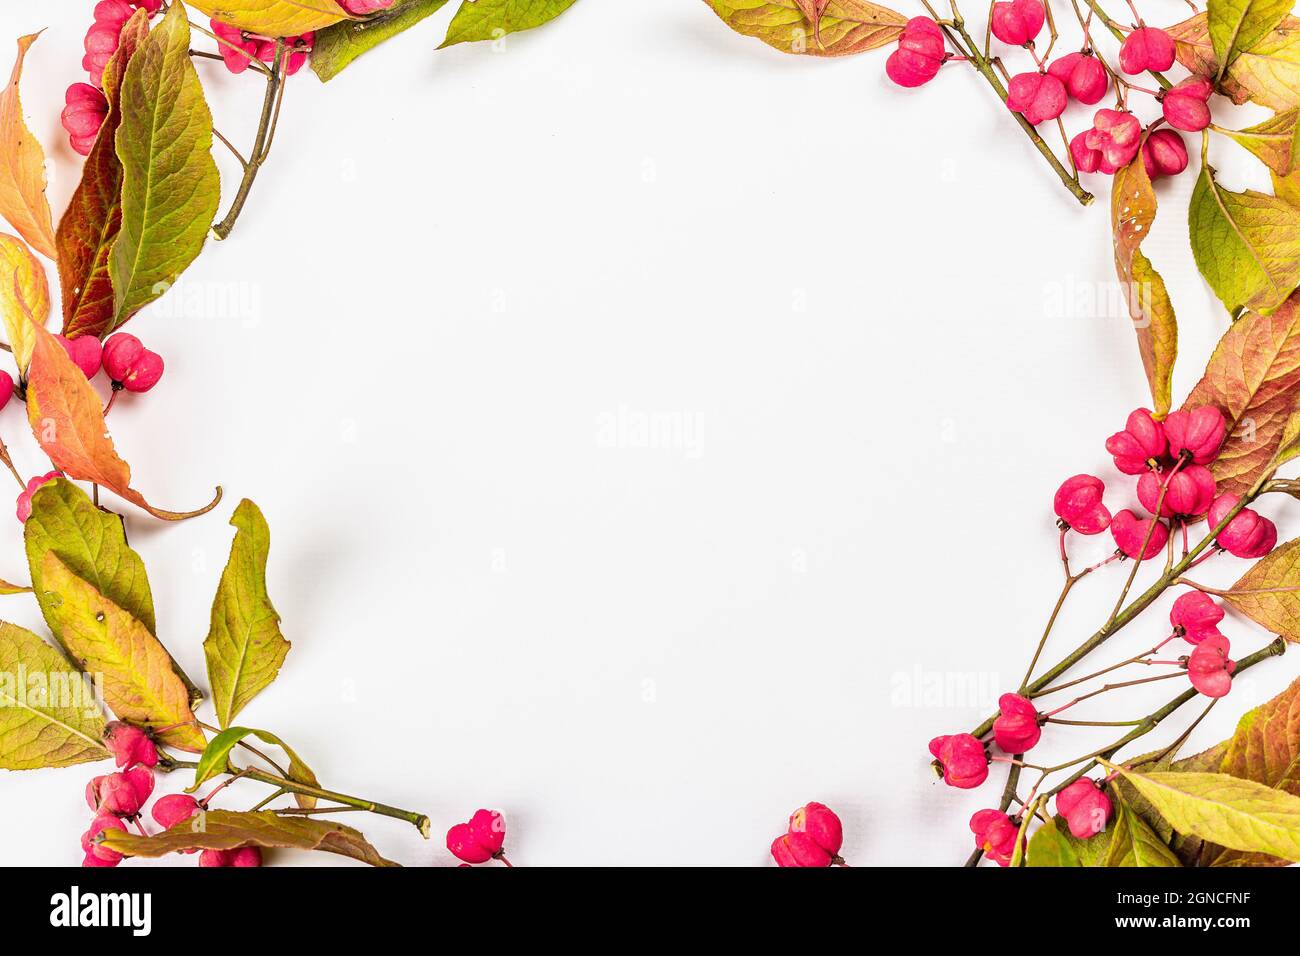 Wreath from Euonymus europaeus isolated on a white background. Autumn frame decorative composition with toxic fruits, orange seeds, and fall colorful Stock Photo